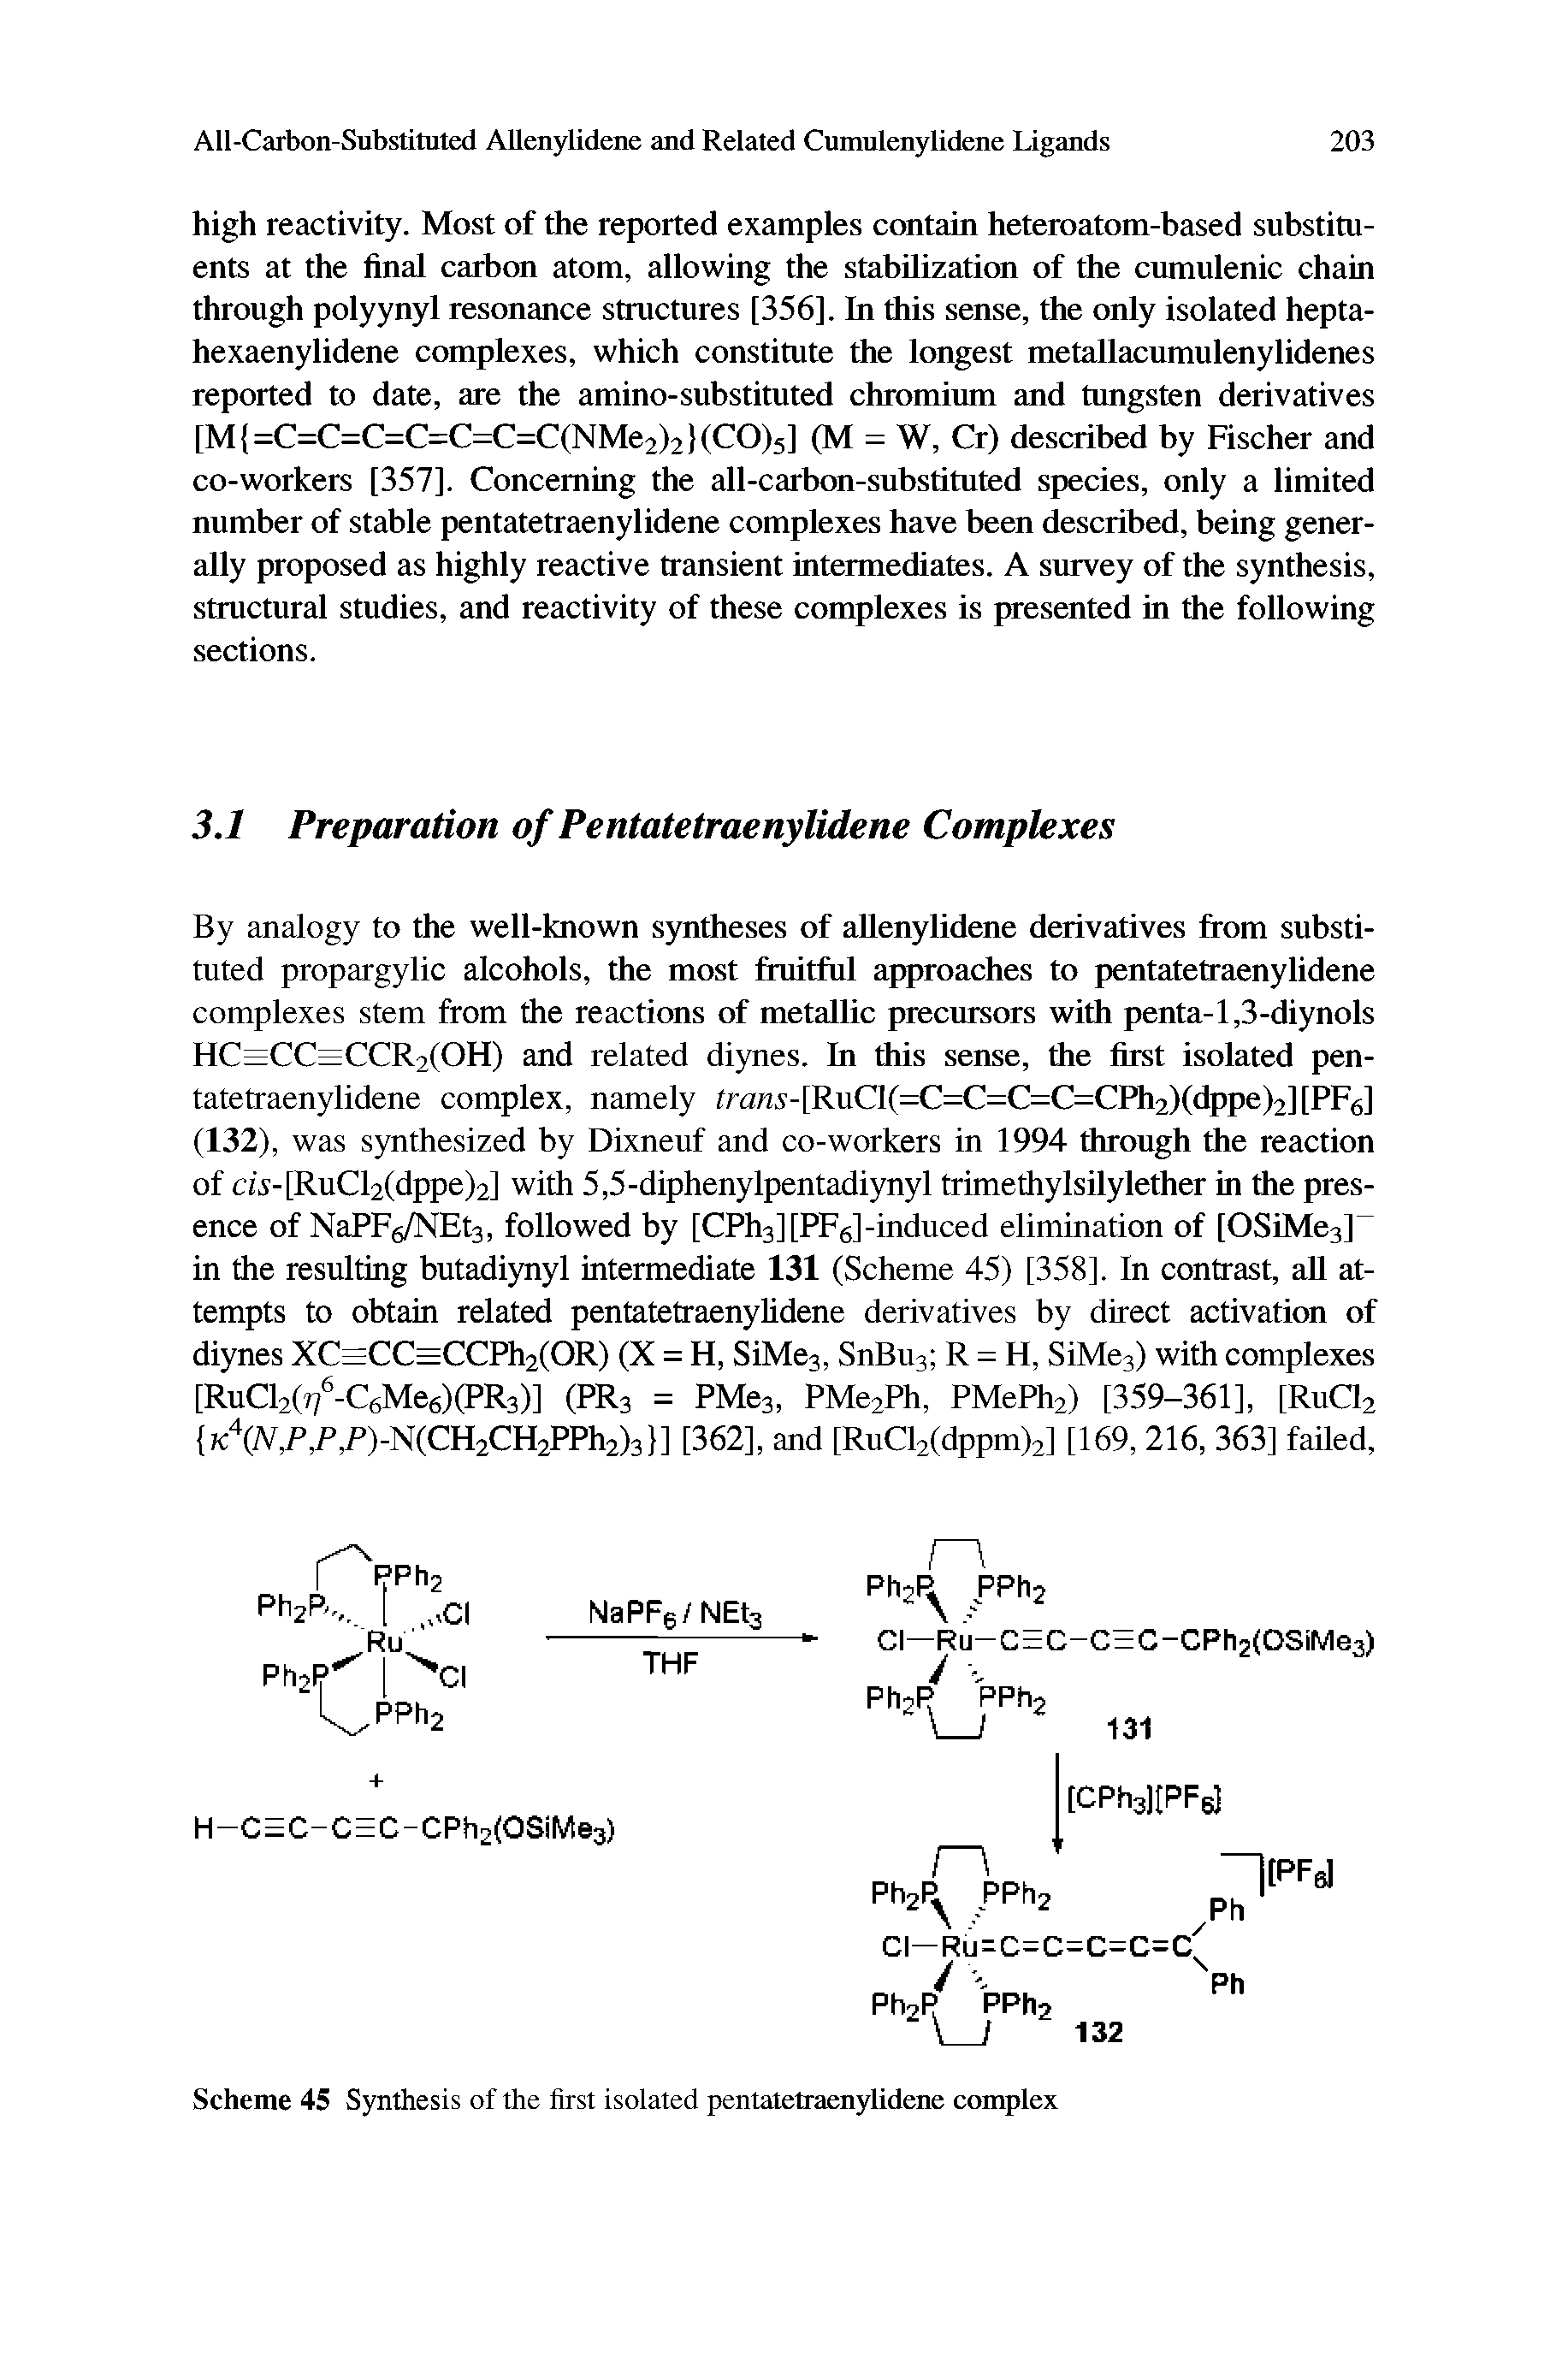 Scheme 45 Synthesis of the first isolated pentatetraenylidene complex...